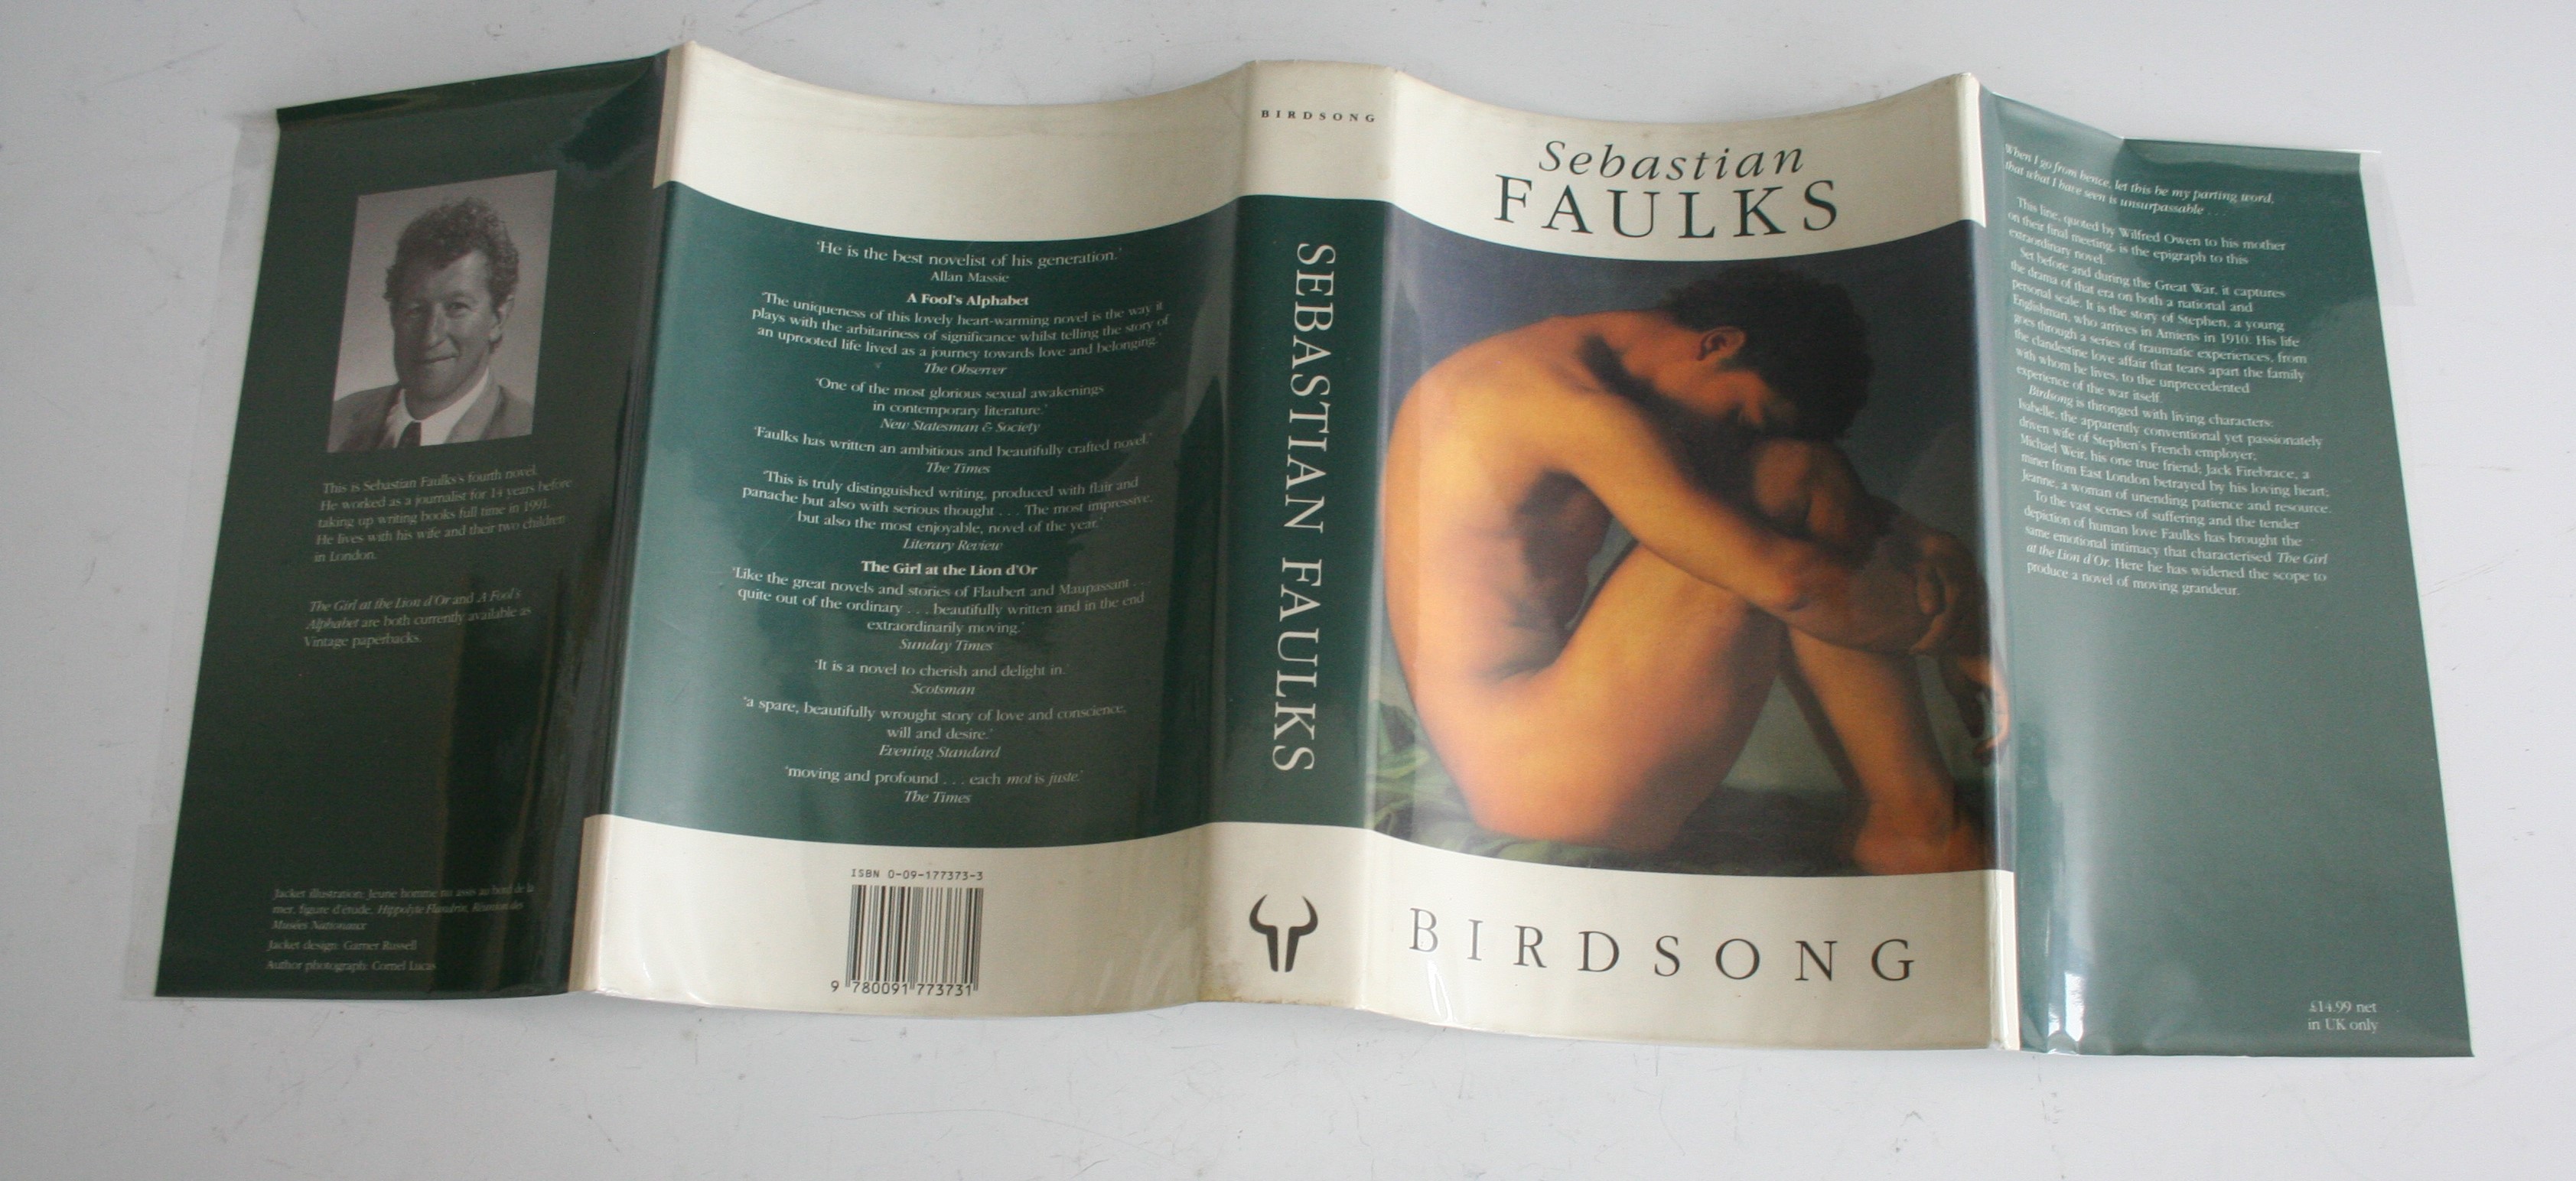 FAULKS, Sebastian, Birdsong. Hutchinson, London, 1993 1 st ed. AUTHOR SIGNED to title page. With - Image 3 of 3